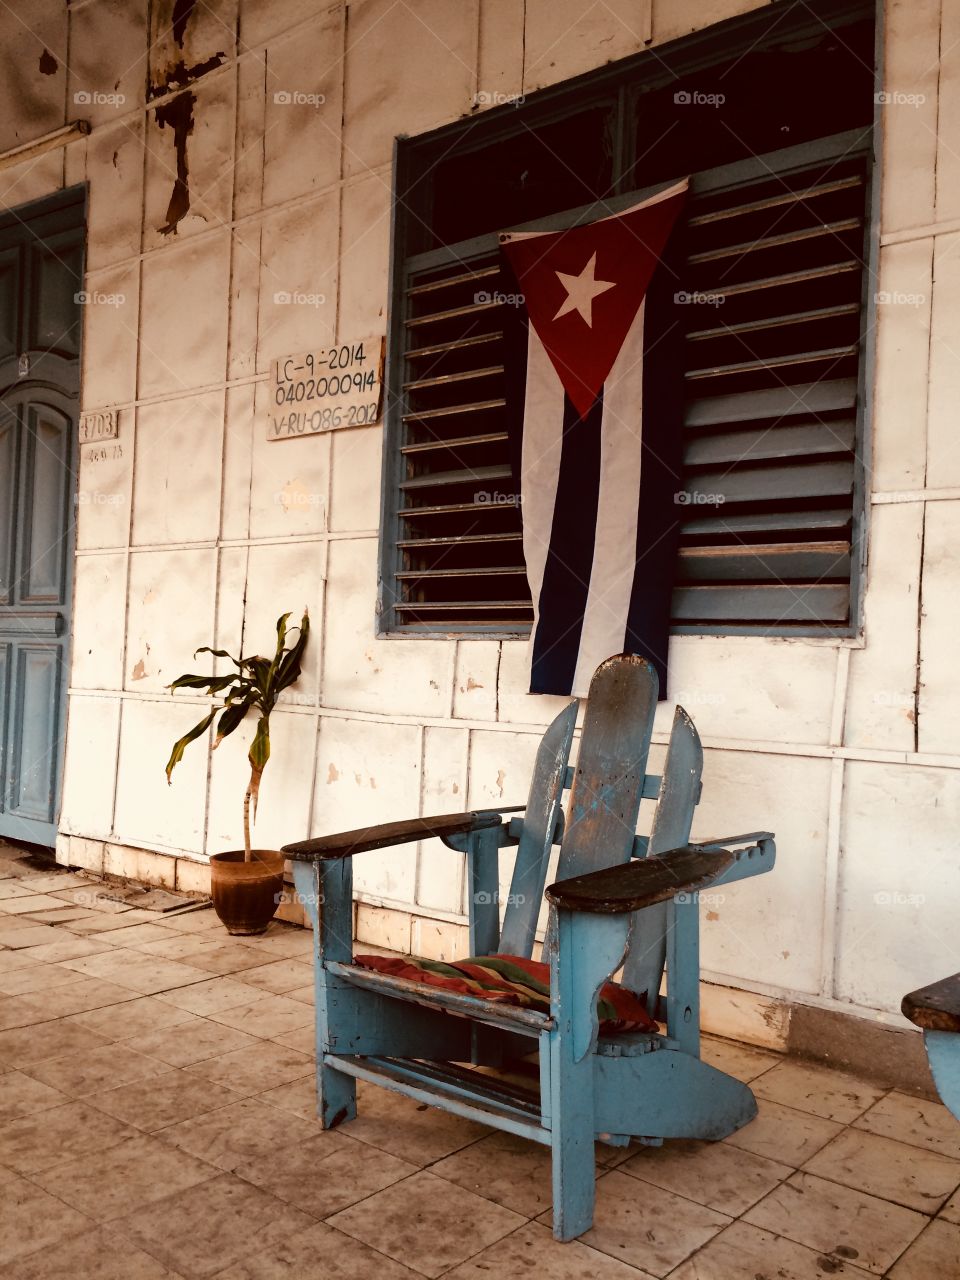 A Street view in Cuba with a chair and a flag